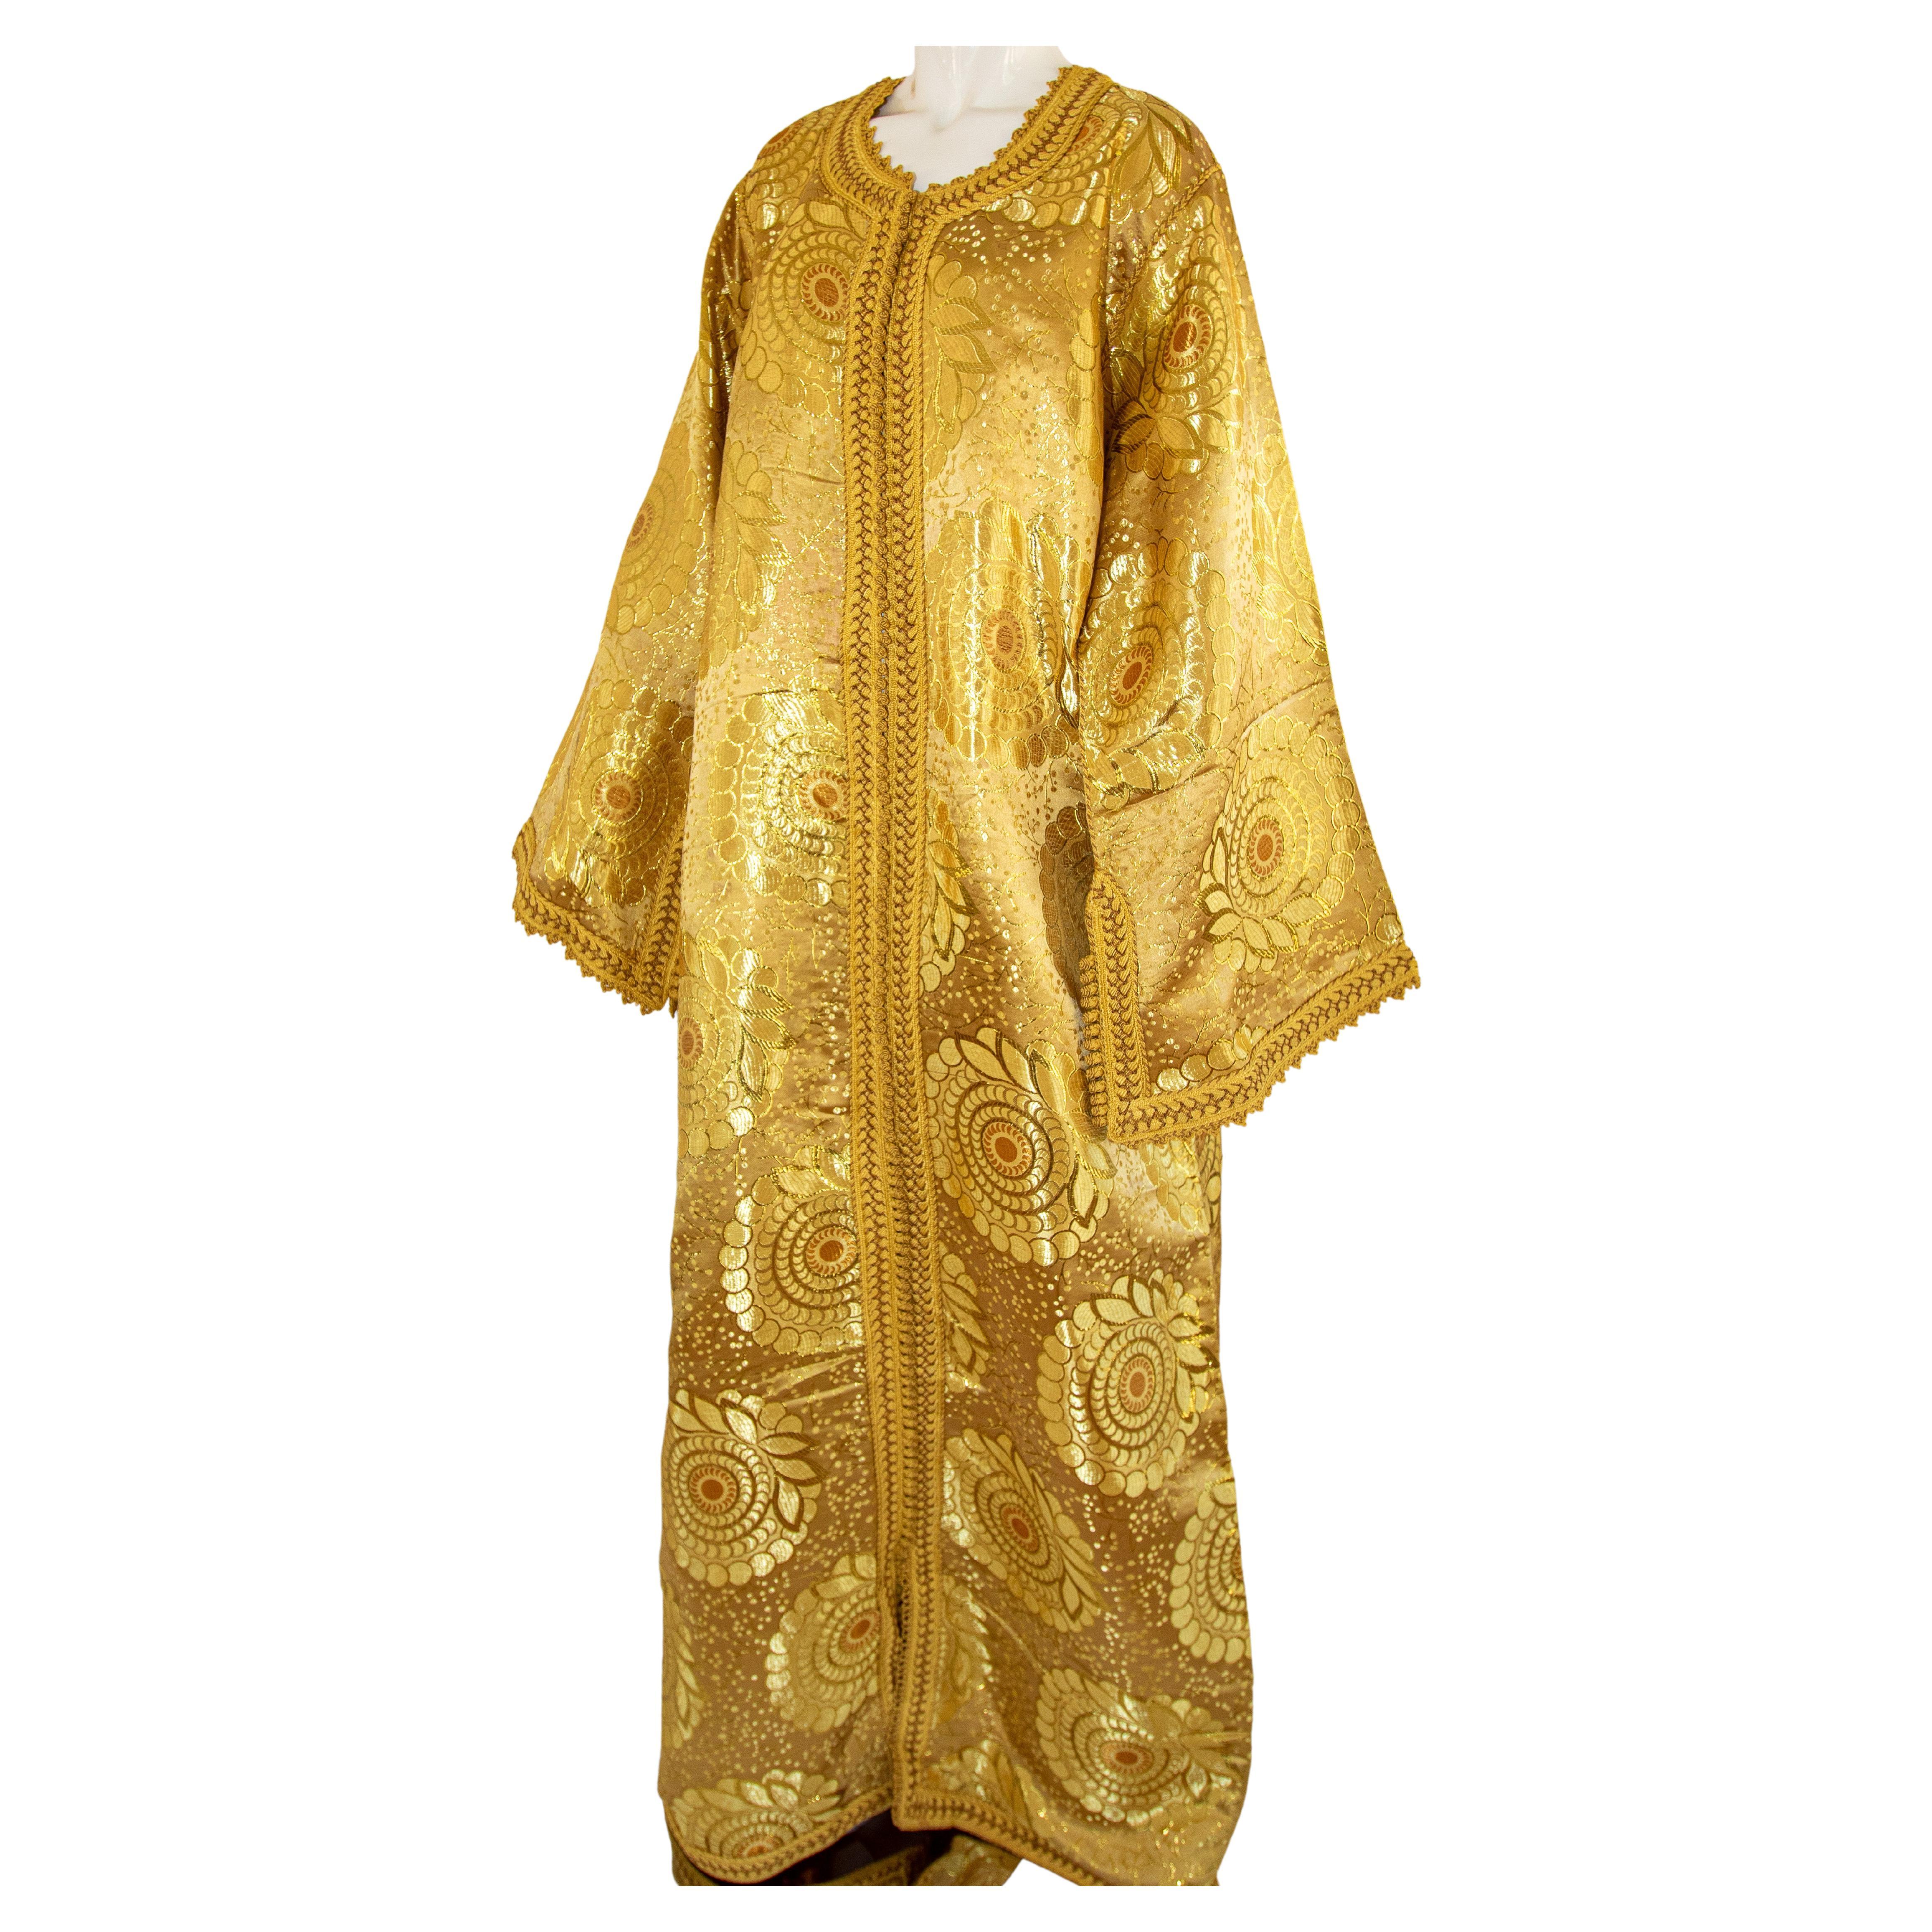 Moroccan Vintage Caftan Gown in Gold Brocade Maxi Dress Kaftan Size L to XL For Sale